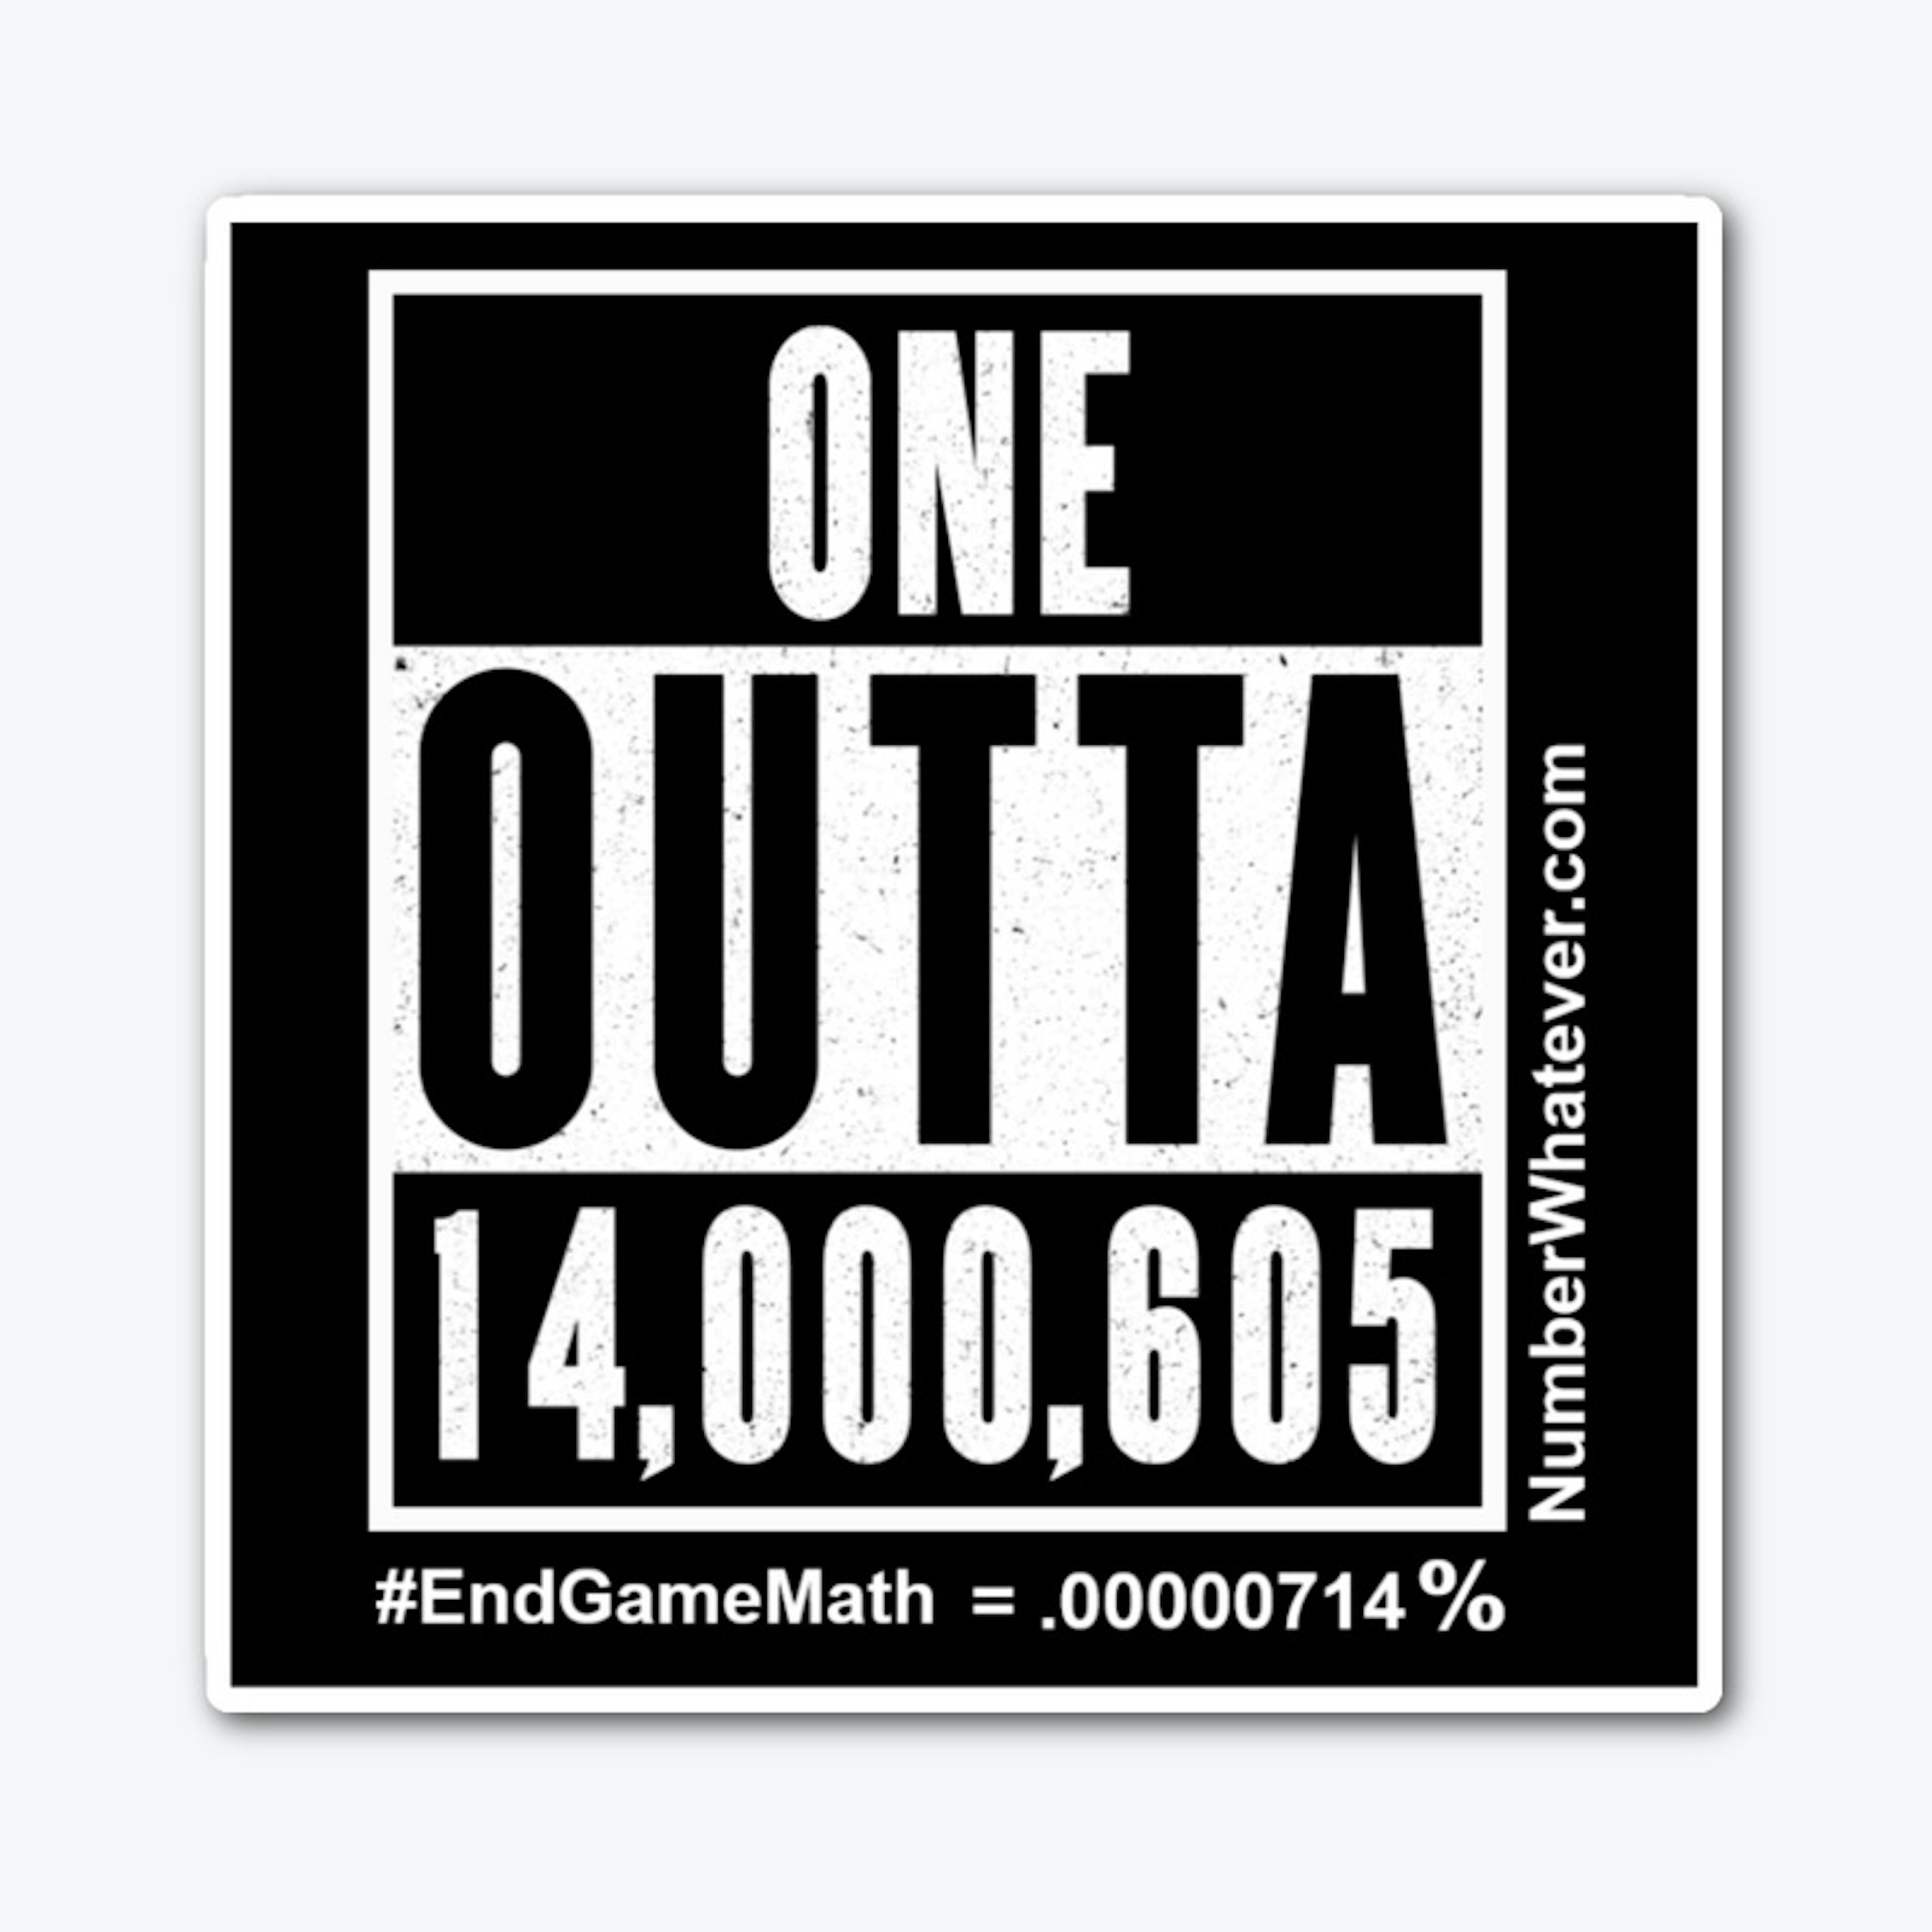 #EndGameMath - How Many Did We Win? ONE.